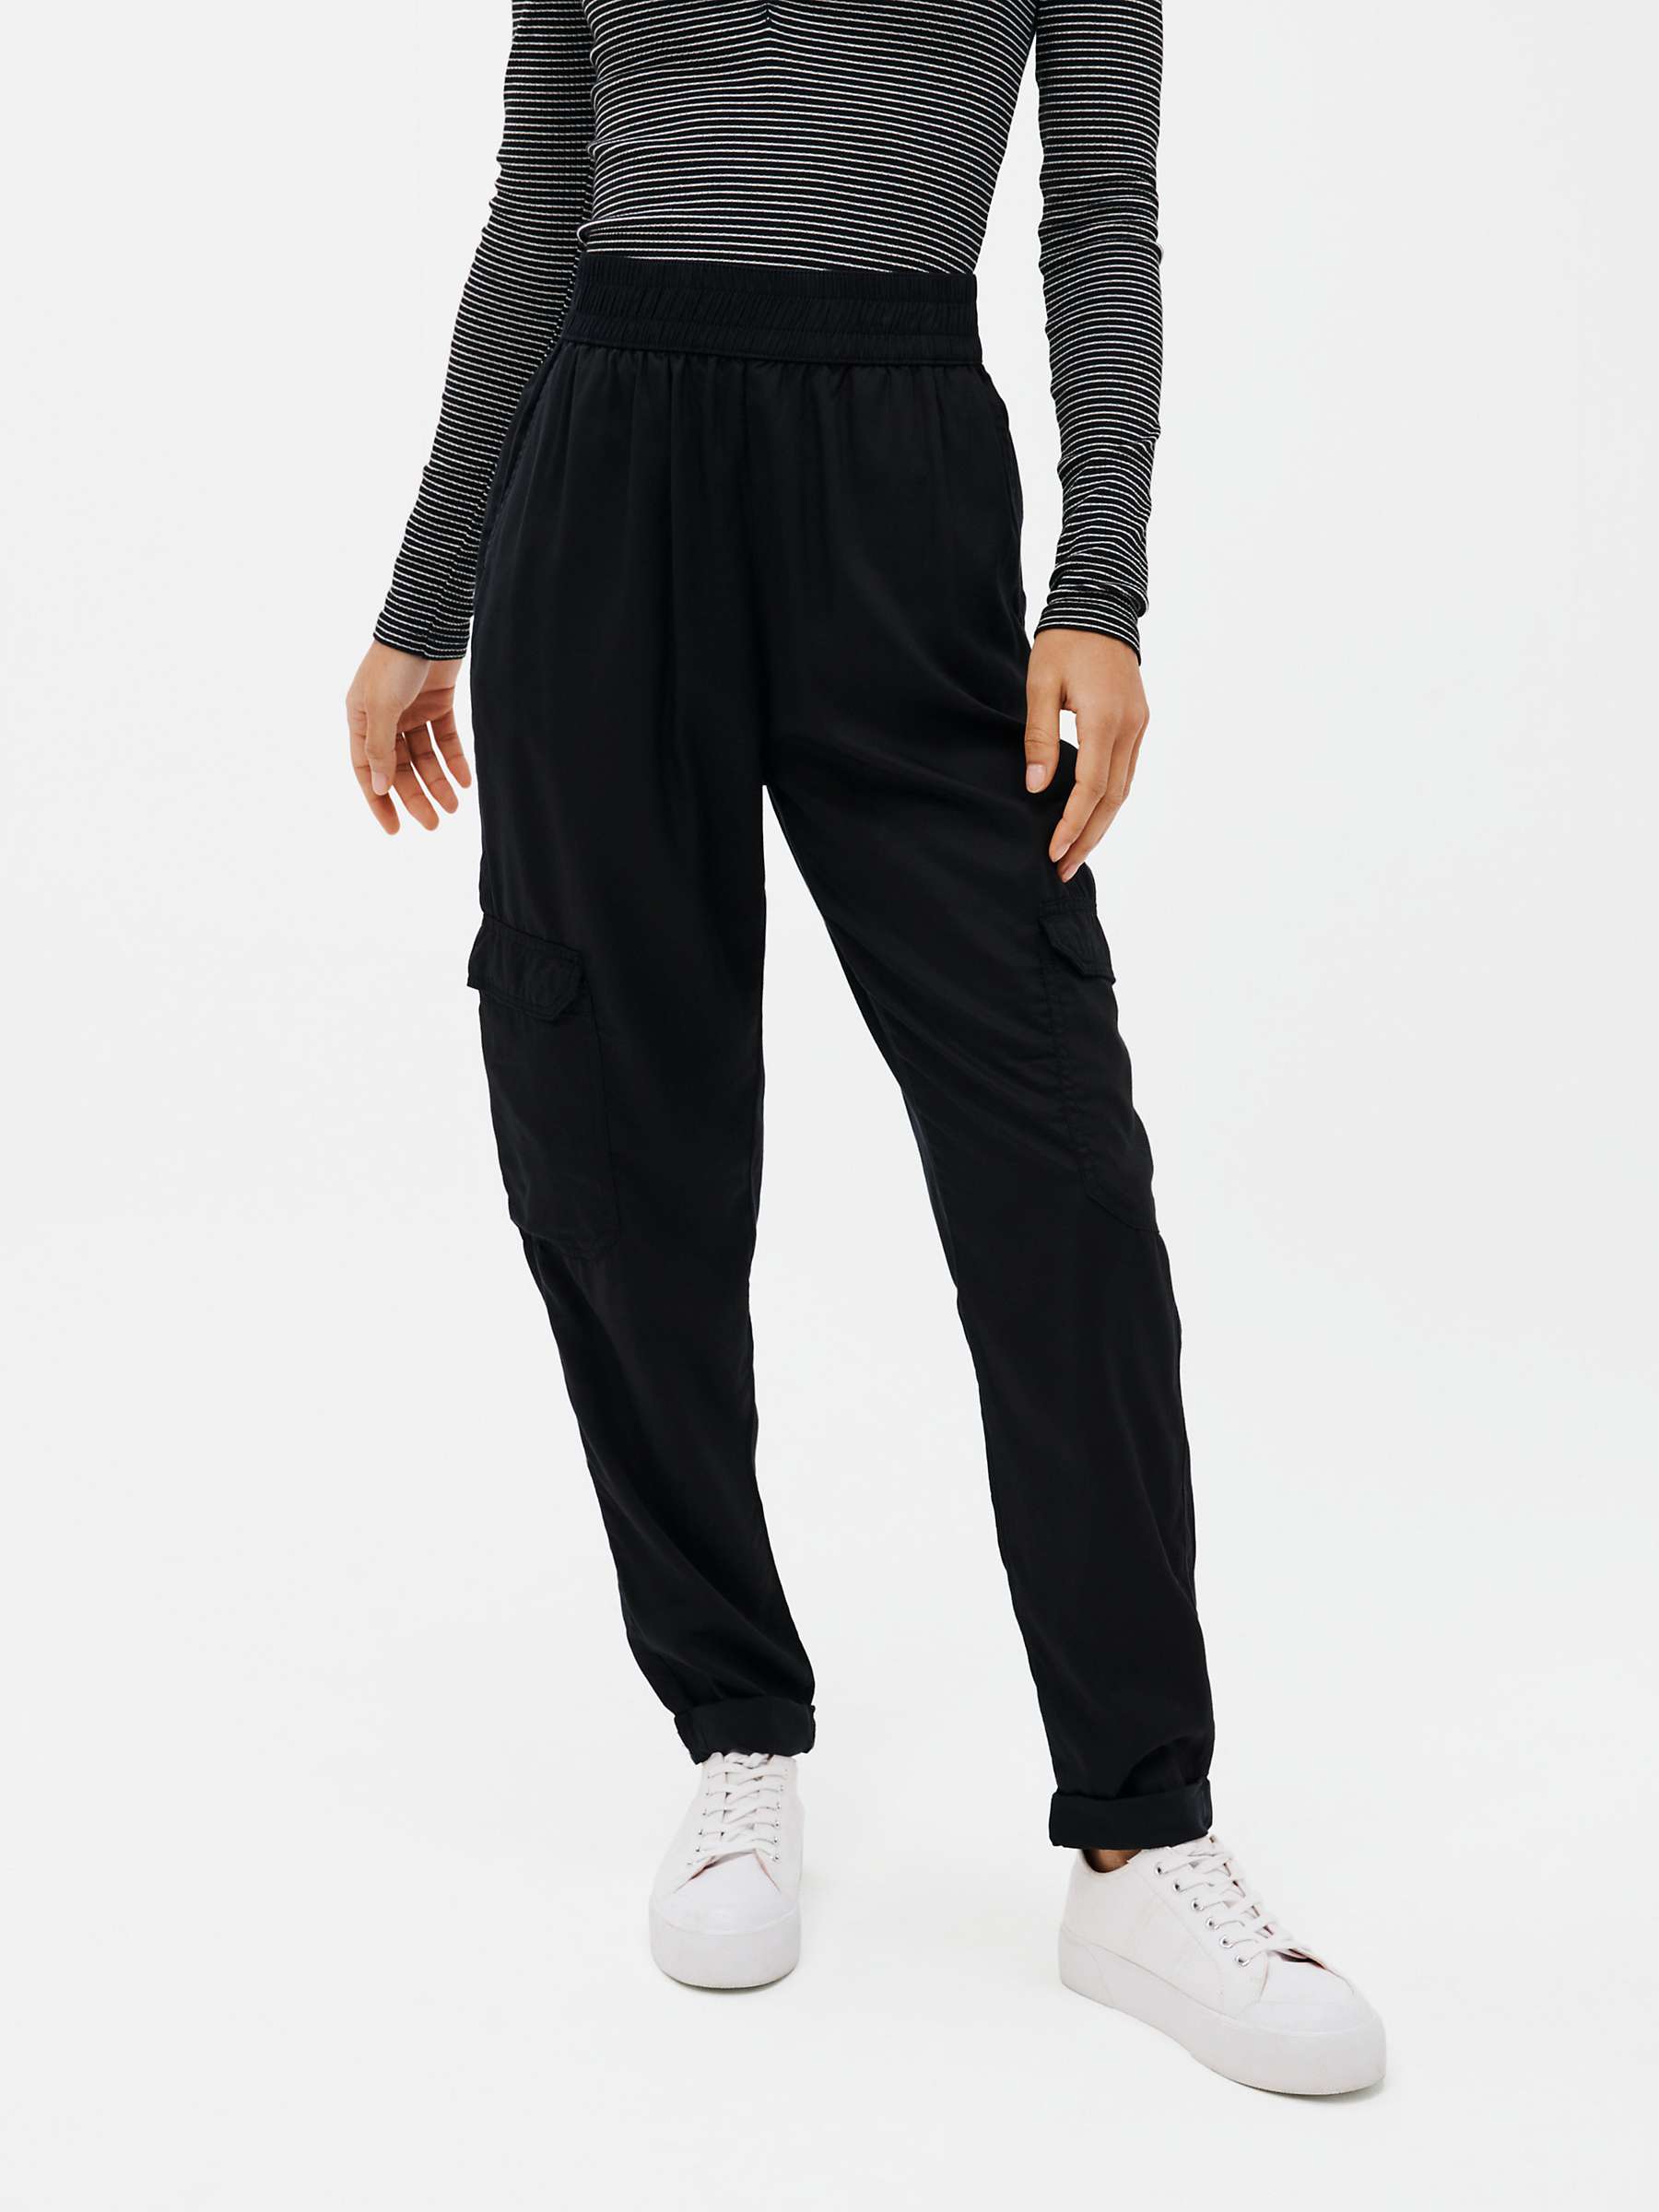 Buy John Lewis ANYDAY Plain Cargo Pocket Turn Up Trousers Online at johnlewis.com